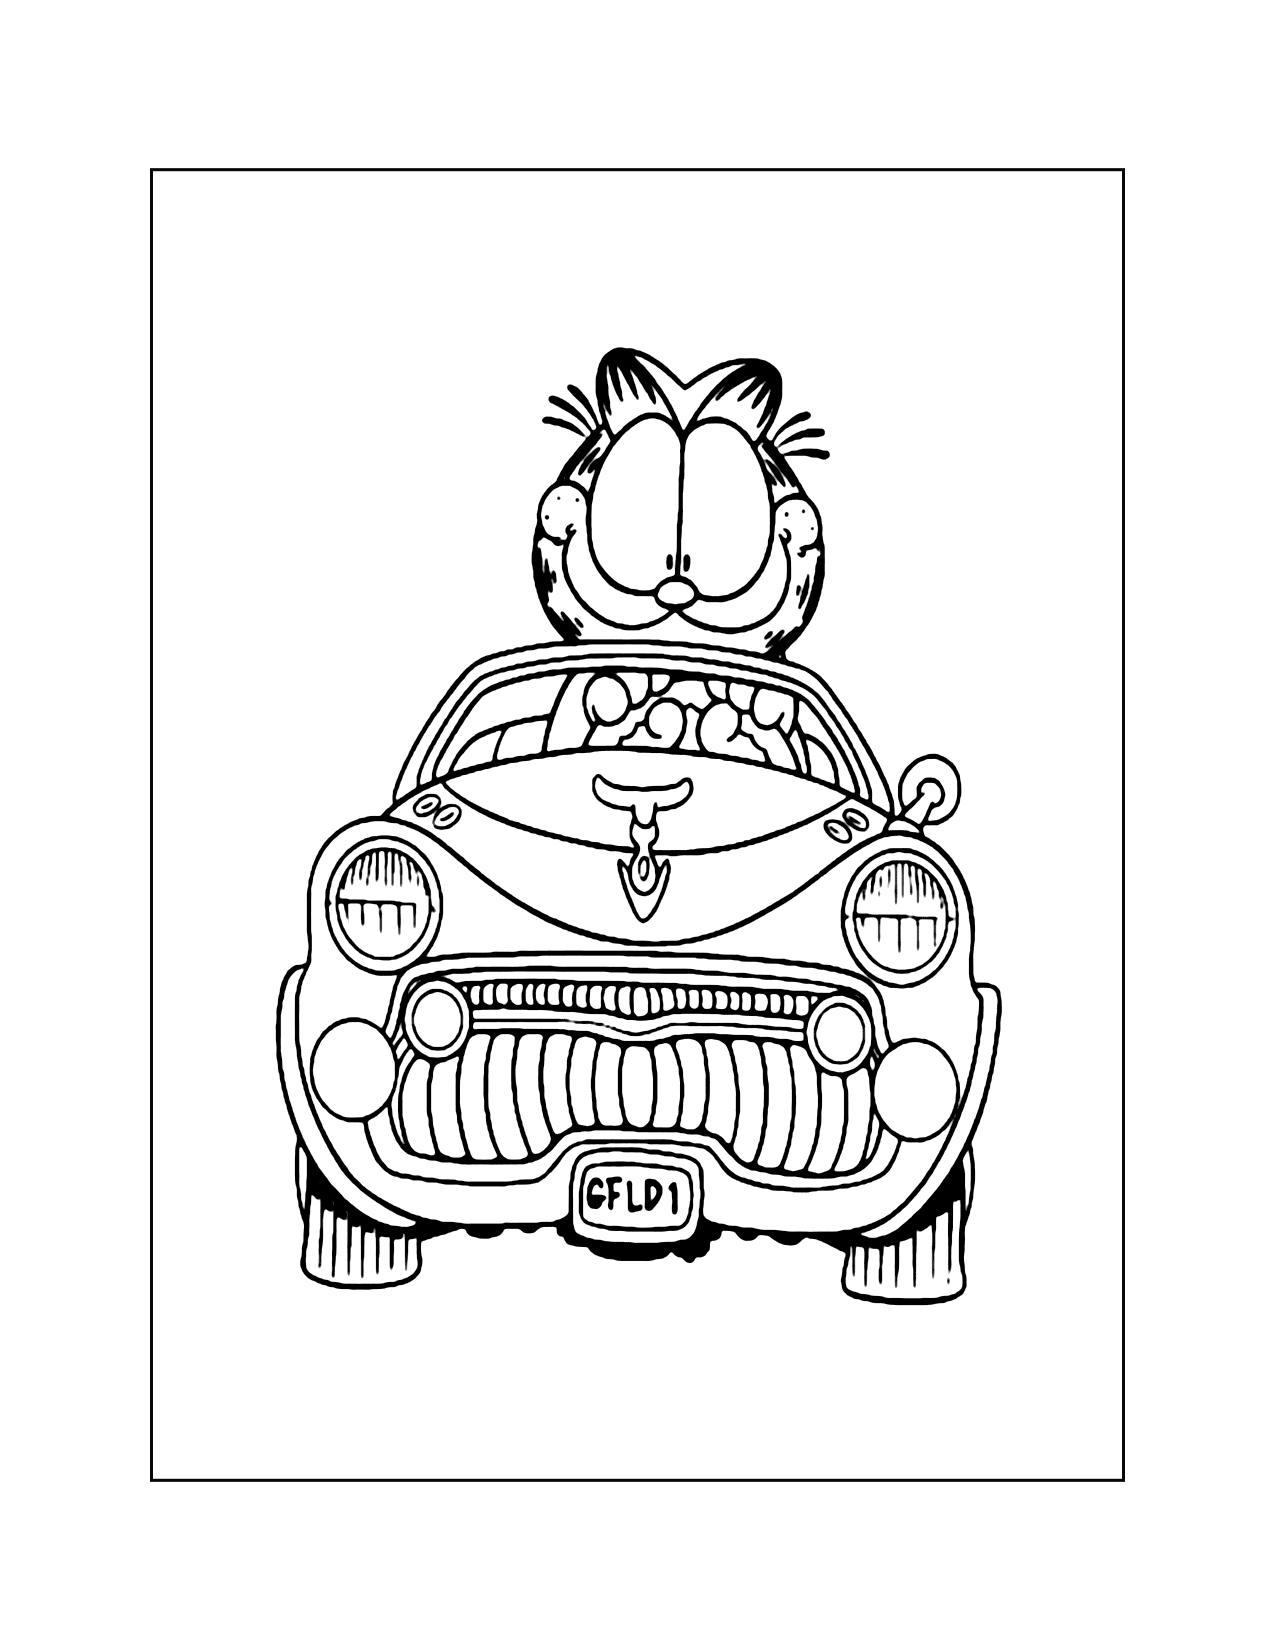 Garfield Driving Car Coloring Page